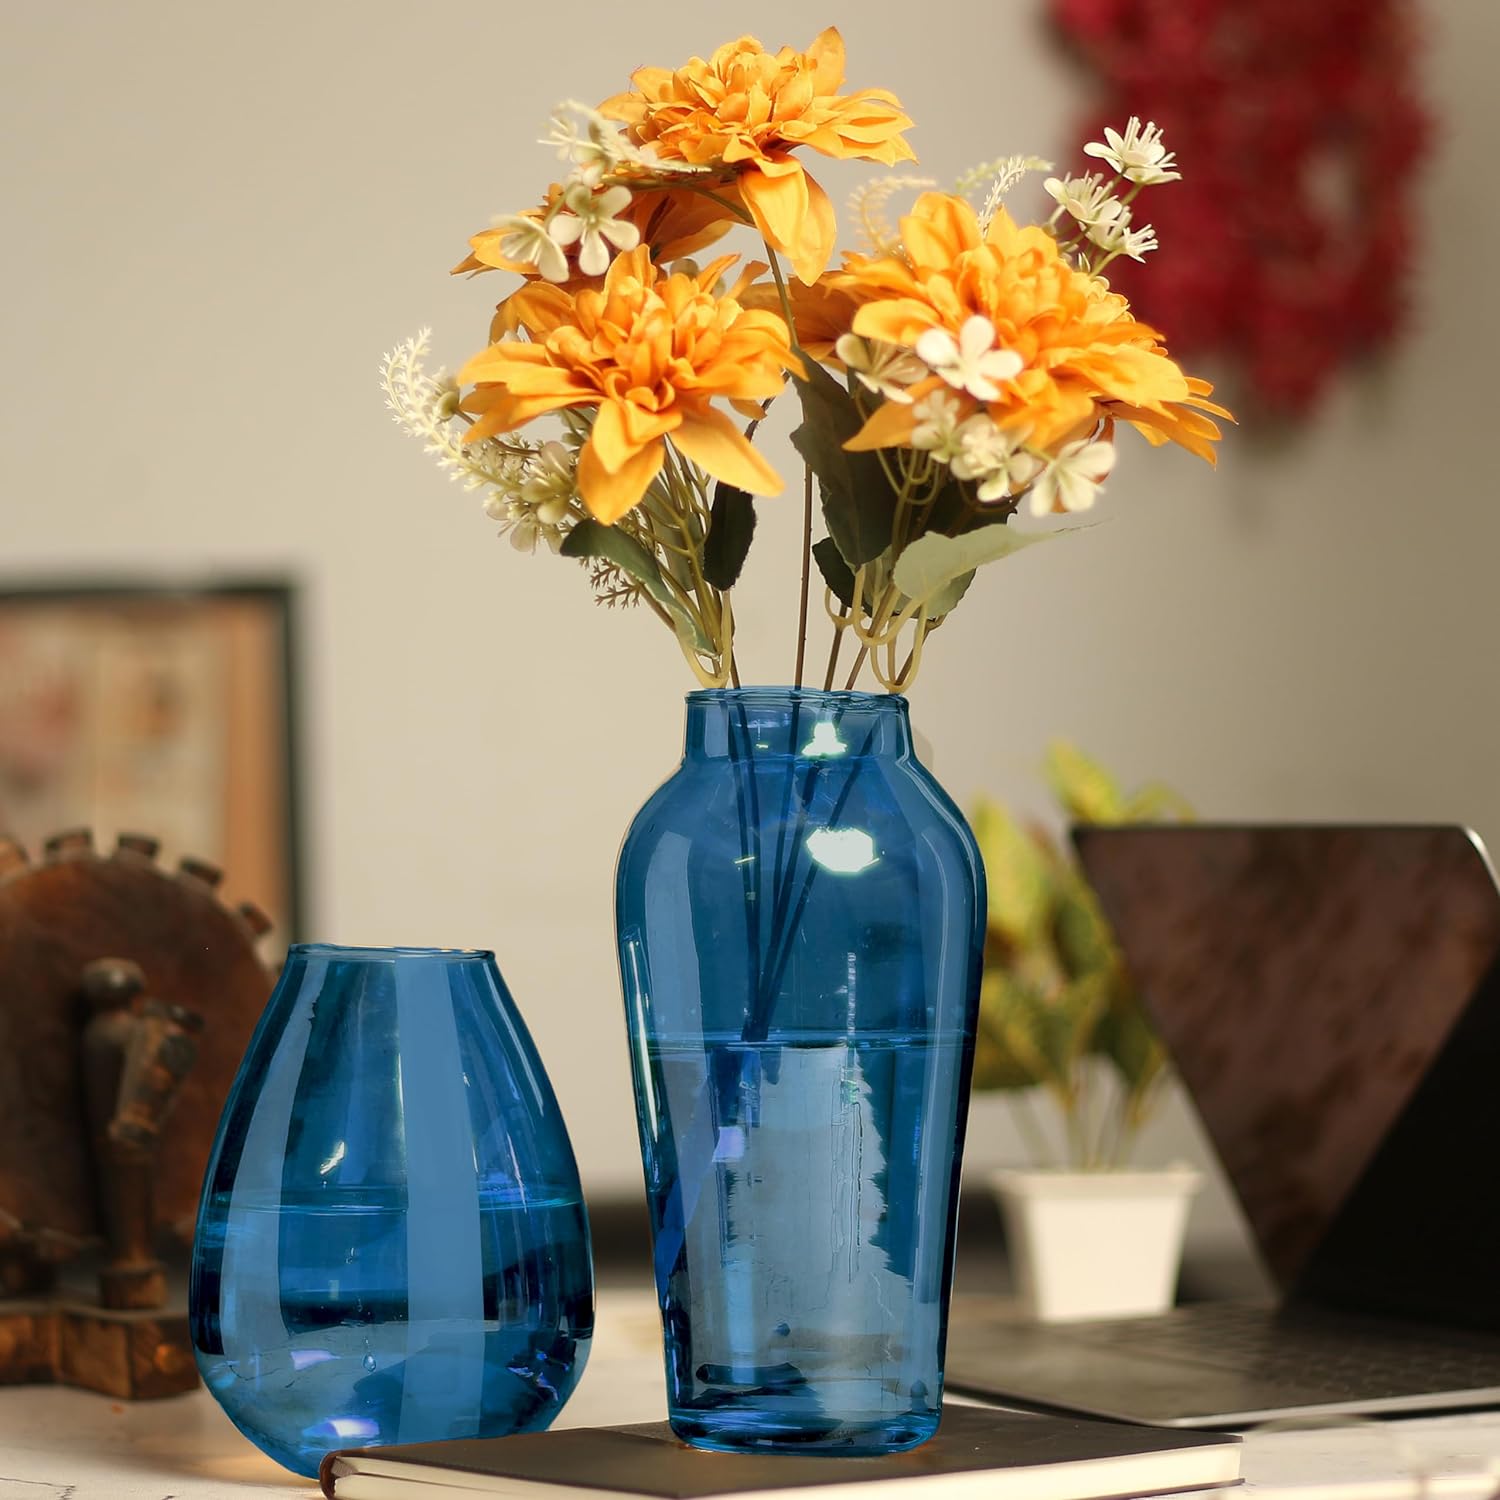 Beautiful blue vase filled with flowers.